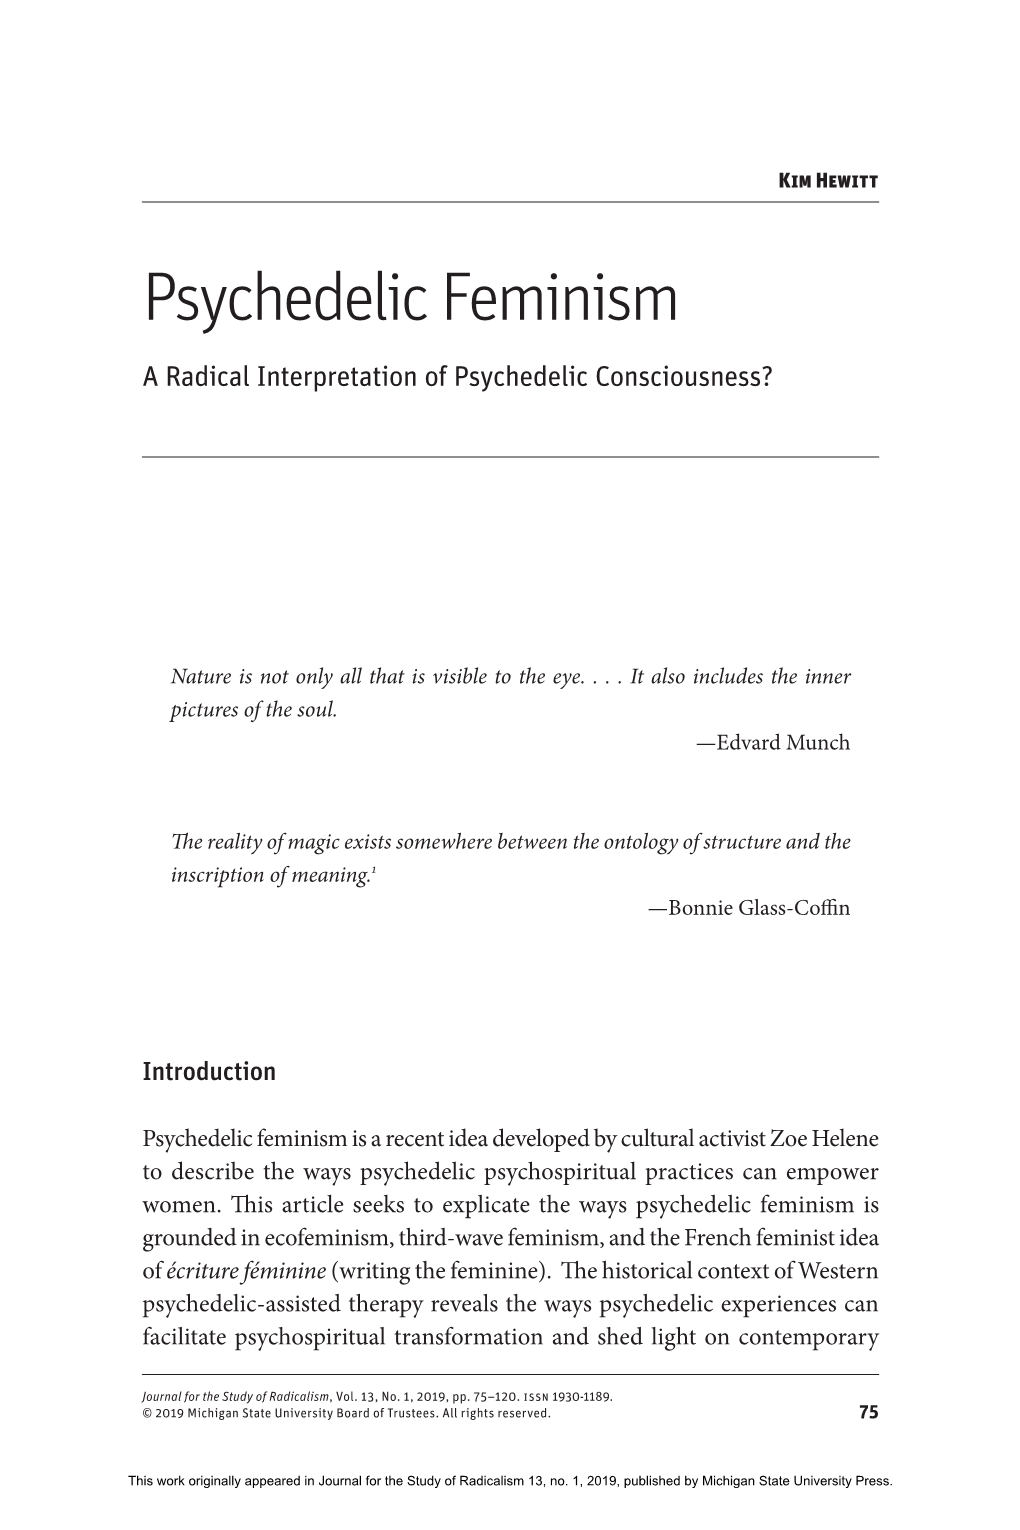 Psychedelic Feminism a Radical Interpretation of Psychedelic Consciousness?